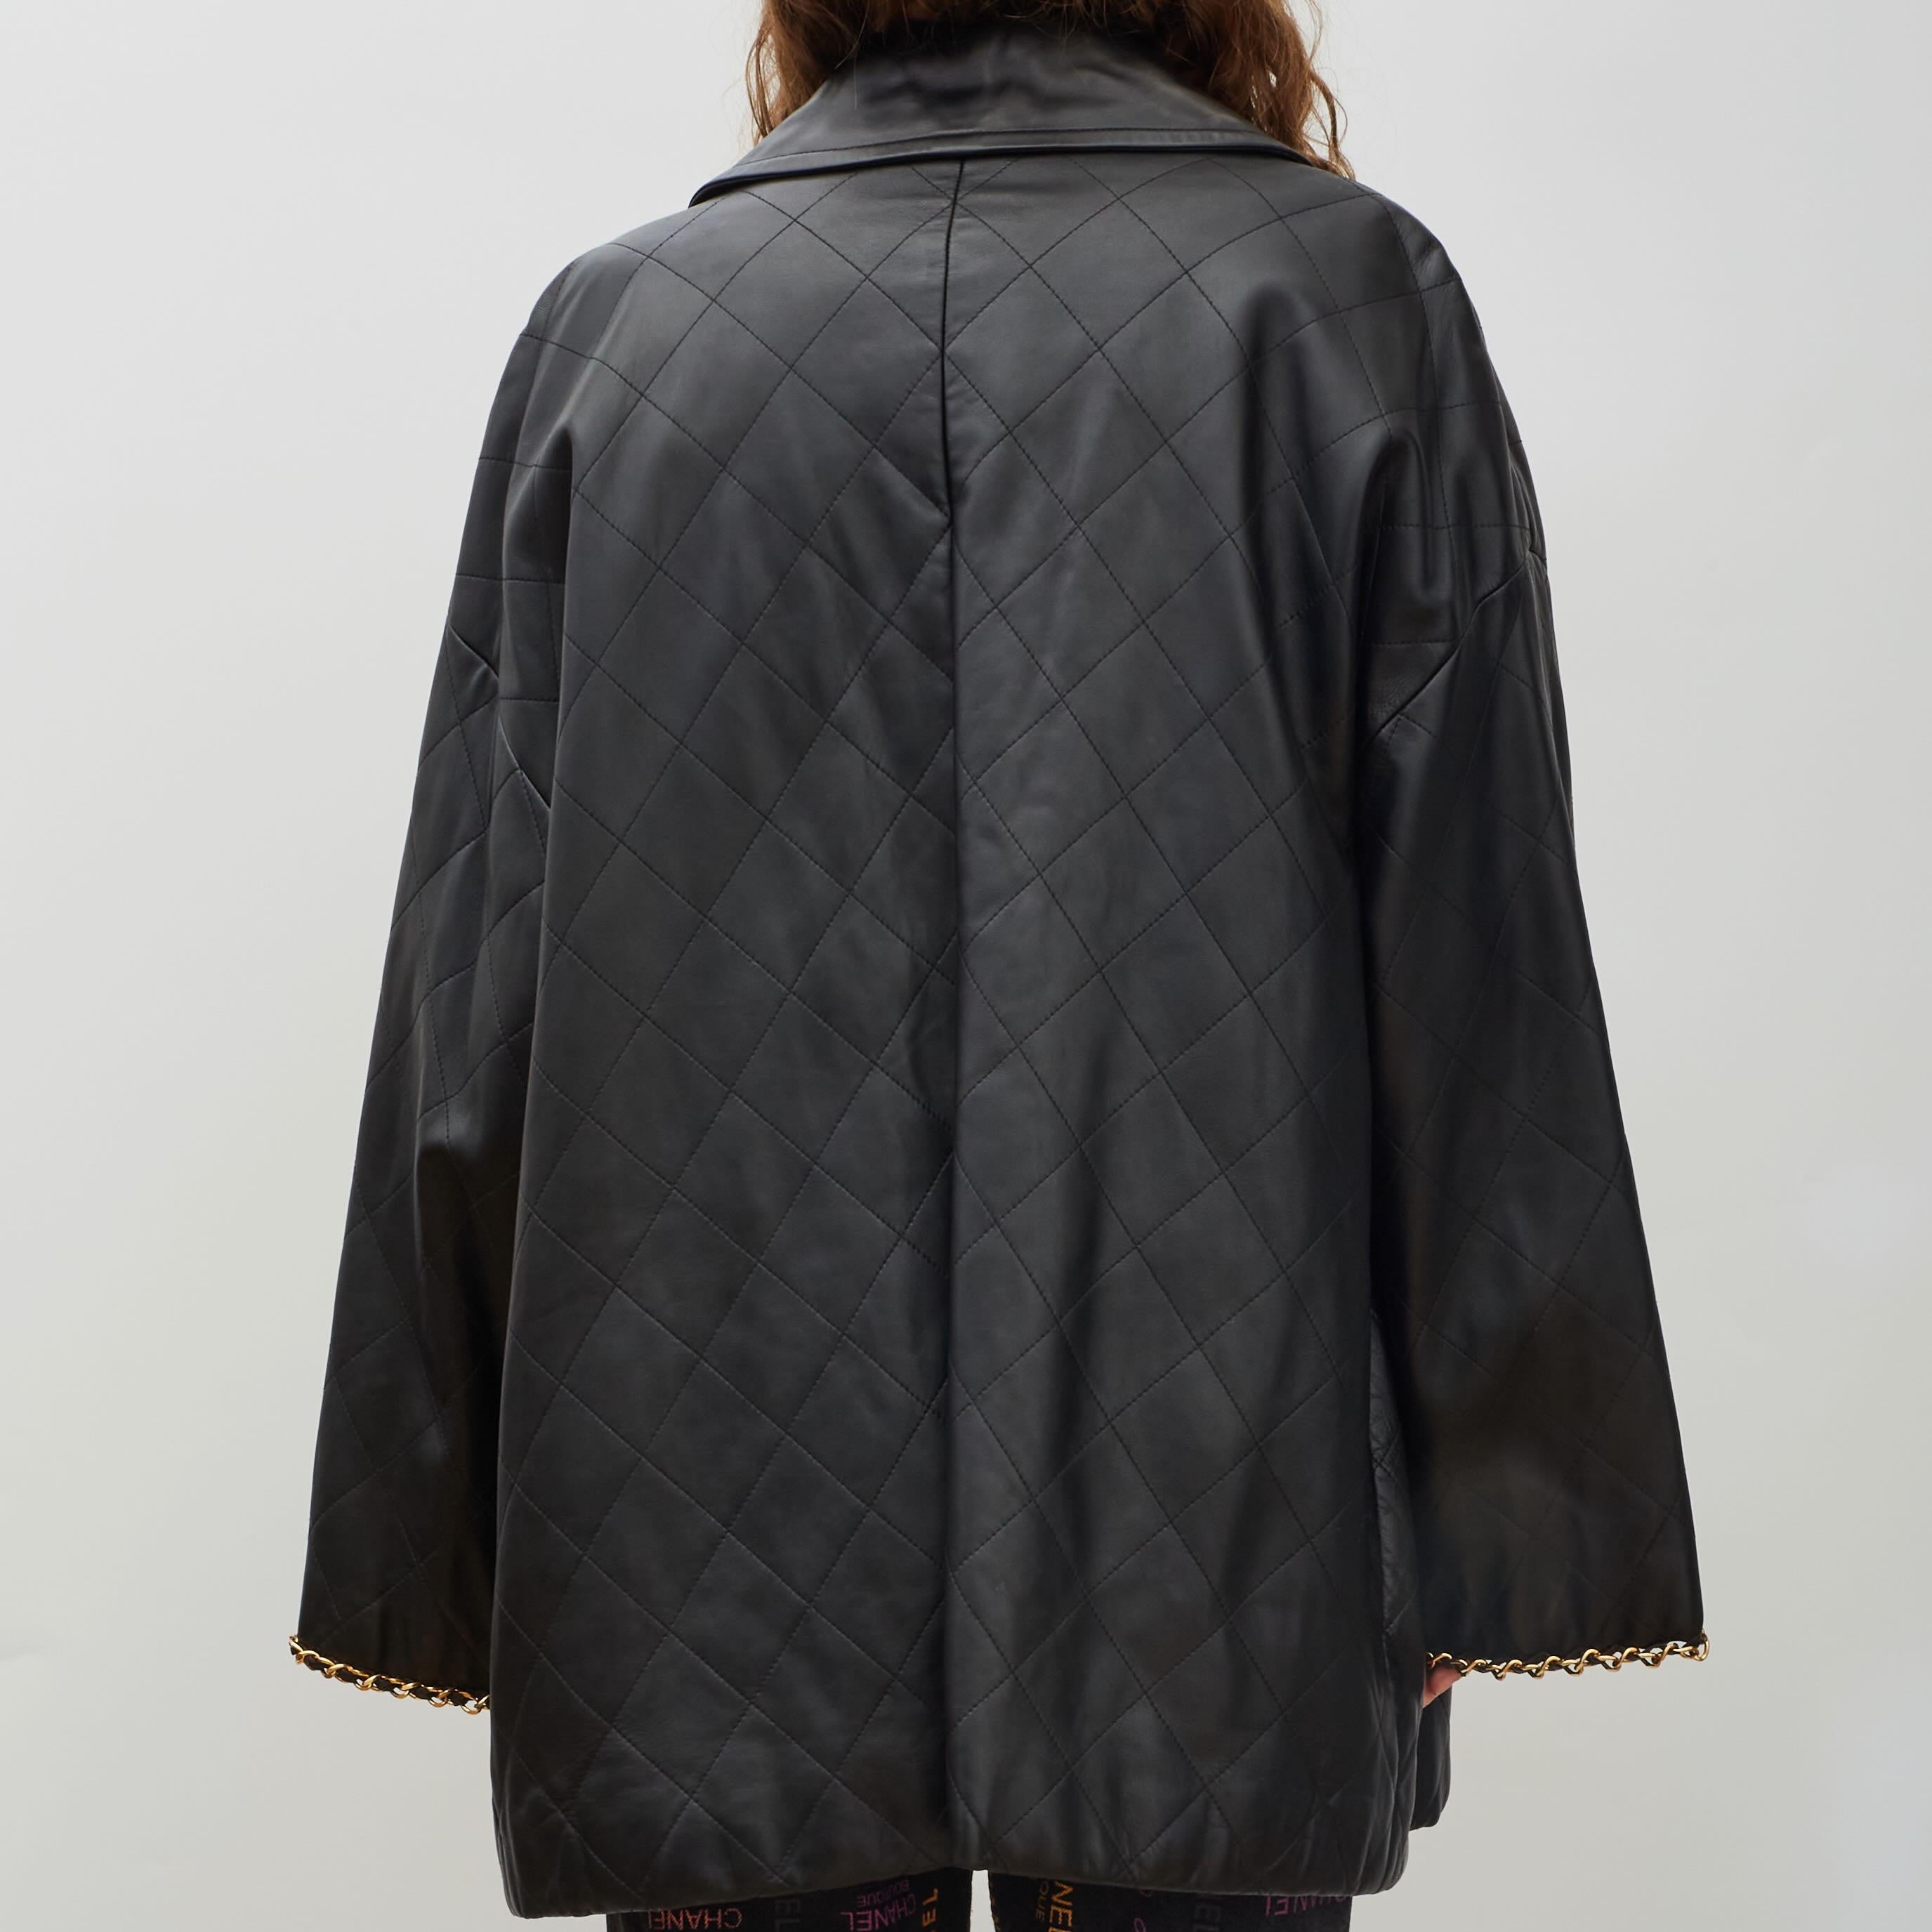 Chanel Vintage Black Lambskin Quilted Leather Swing Coat (FR44  Large) In Good Condition For Sale In Montreal, Quebec